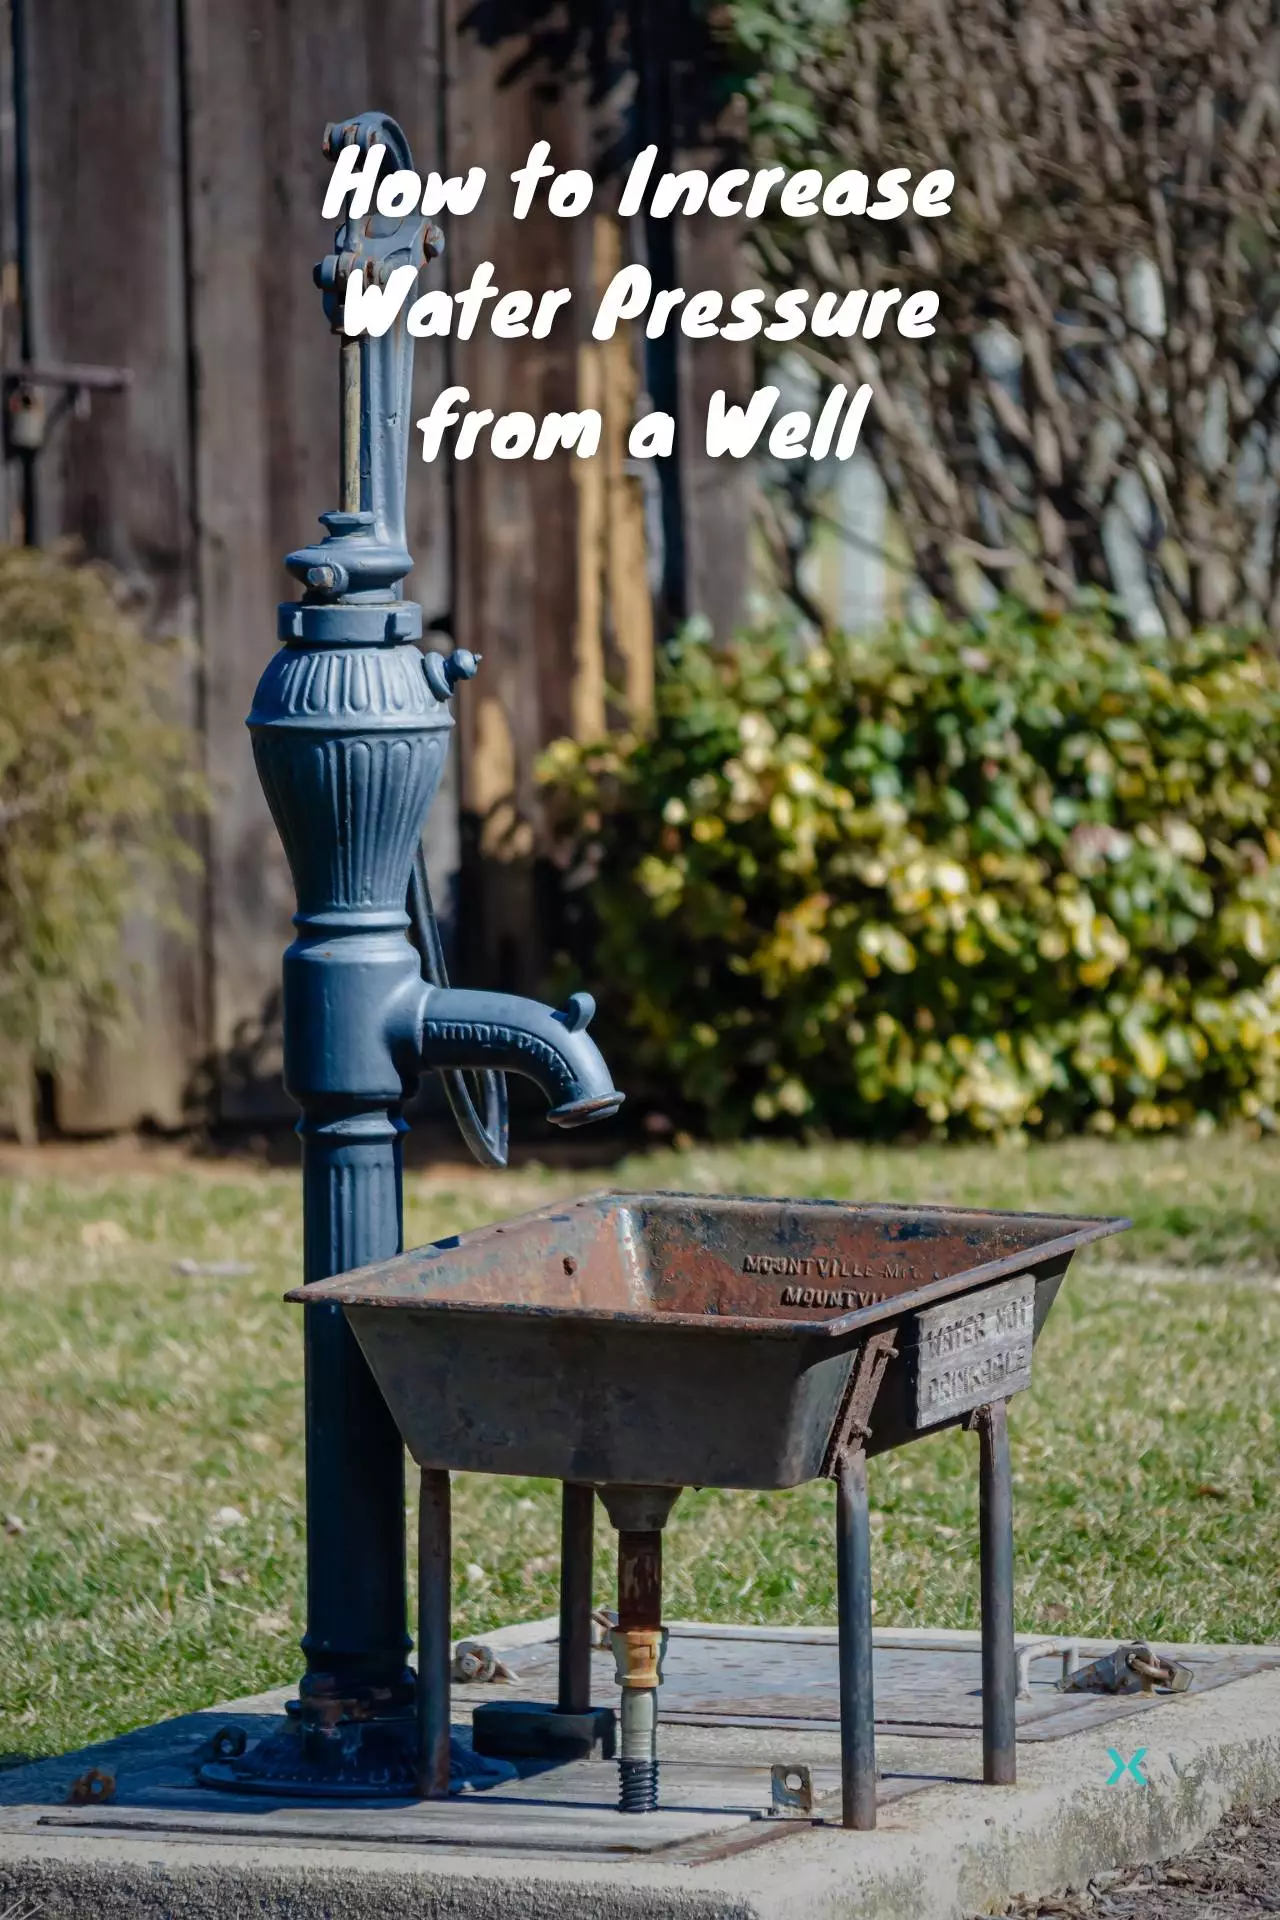 How to Increase Water Pressure from a Well